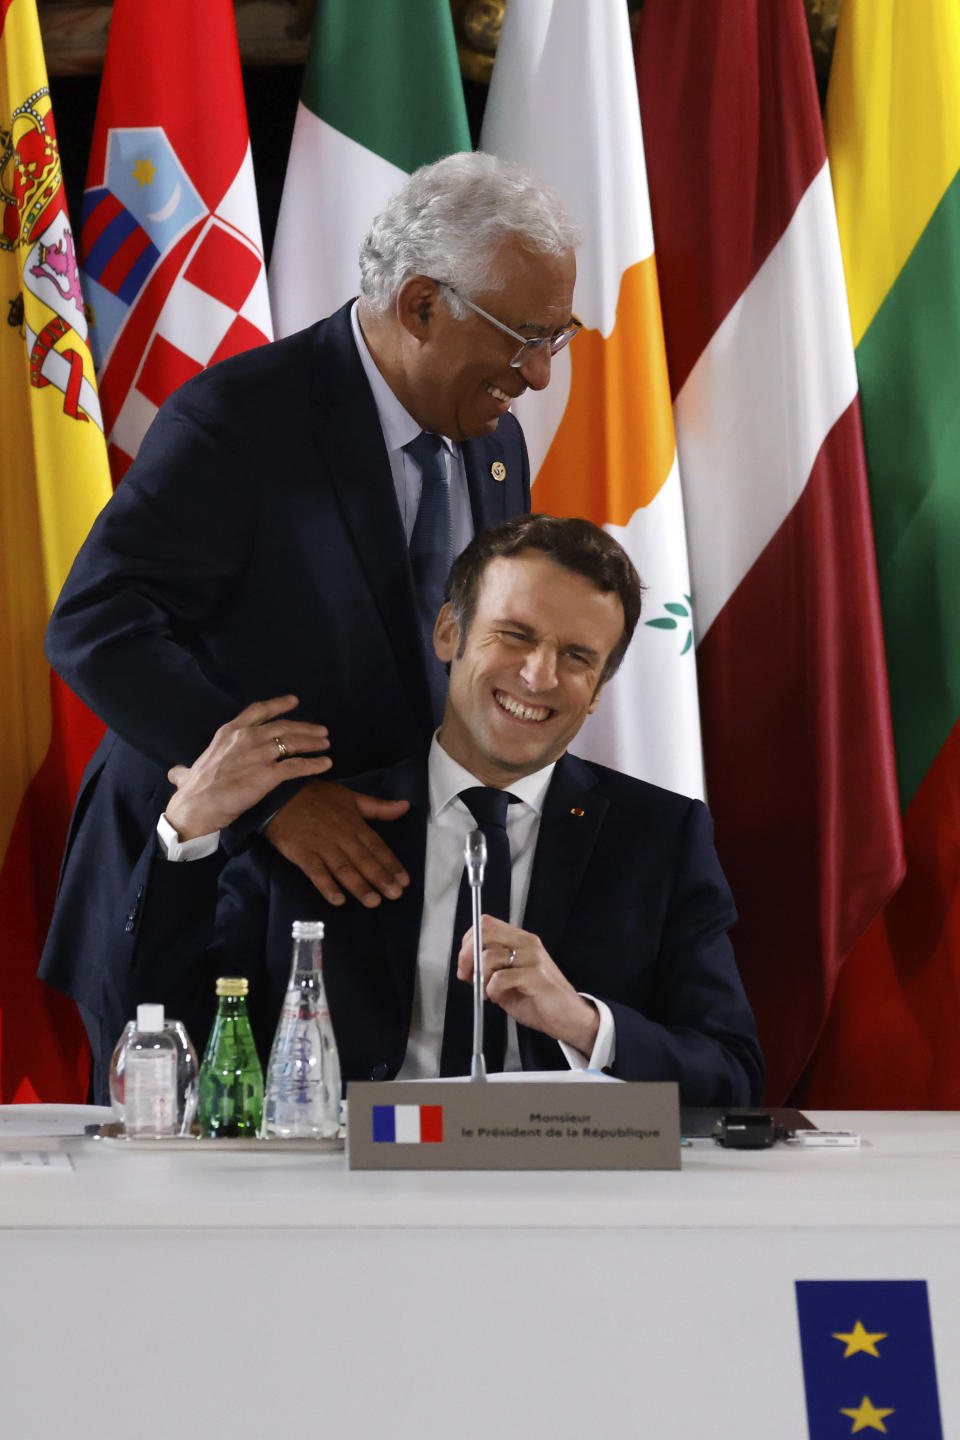 French President Emmanuel Macron share a laugh with Portugal's Prime Minister Antonio Costa, top, during a EU summit at the Palace of Versailles, west of Paris, Thursday, March 10, 2022. European Union leaders have gathered in Versailles for a two-day summit focusing on the war in Ukraine. Their nations have been fully united in backing Ukraine's resistance with unprecedented economic sanctions, but divisions have started to surface on how fast the bloc could move in integrating Ukraine and severing energy ties with Moscow. (Ludovic Marin, Pool via AP)